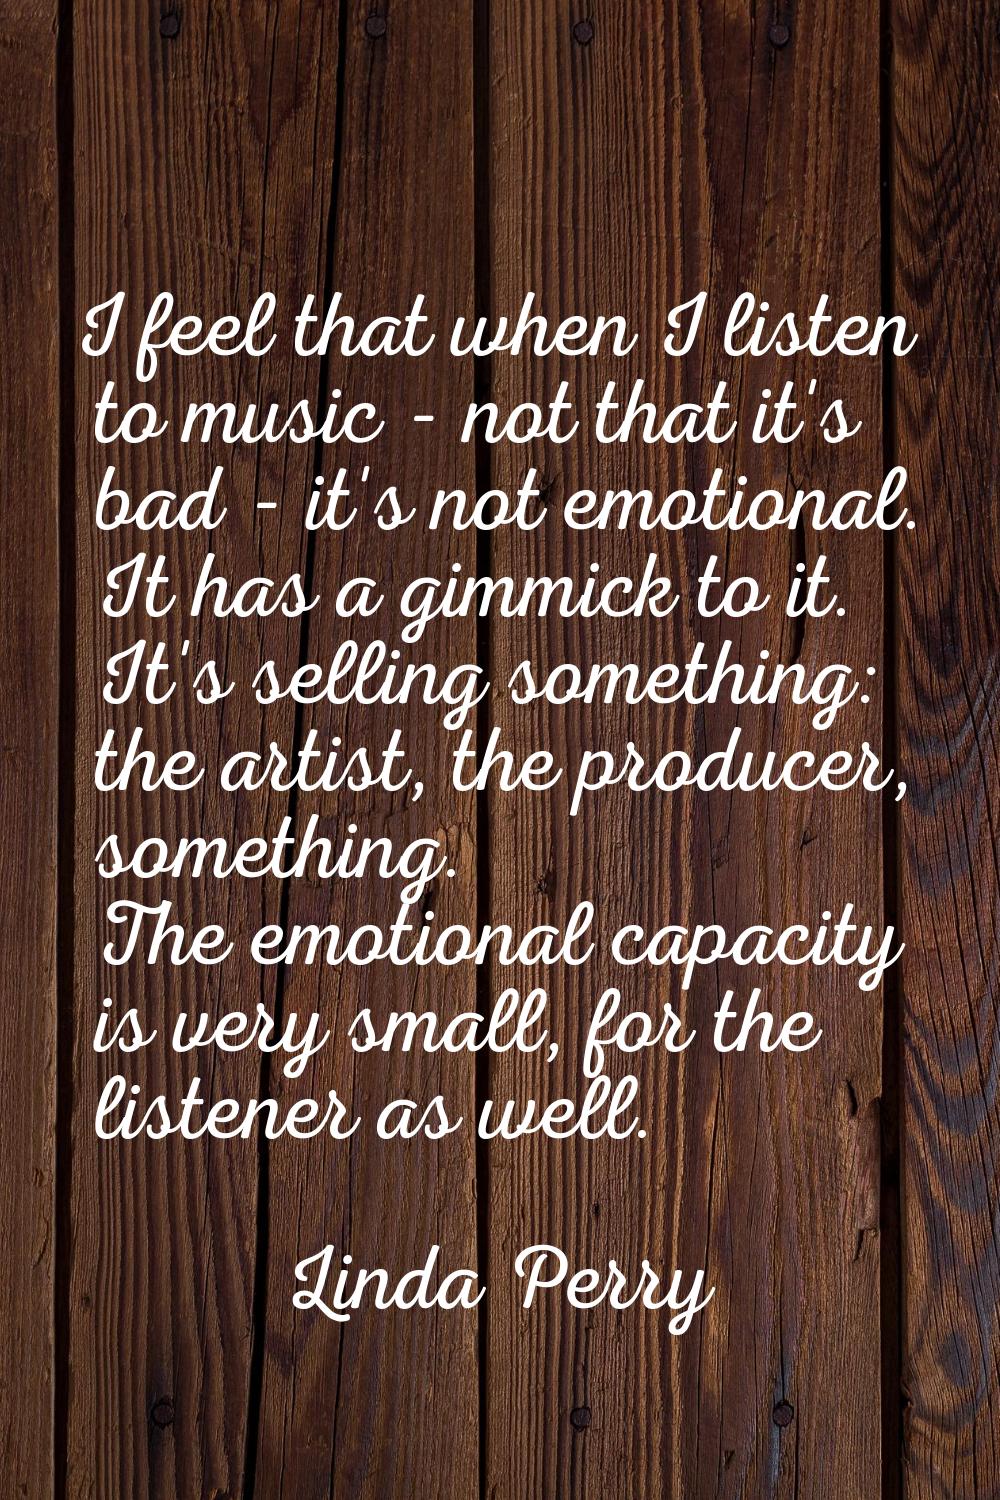 I feel that when I listen to music - not that it's bad - it's not emotional. It has a gimmick to it